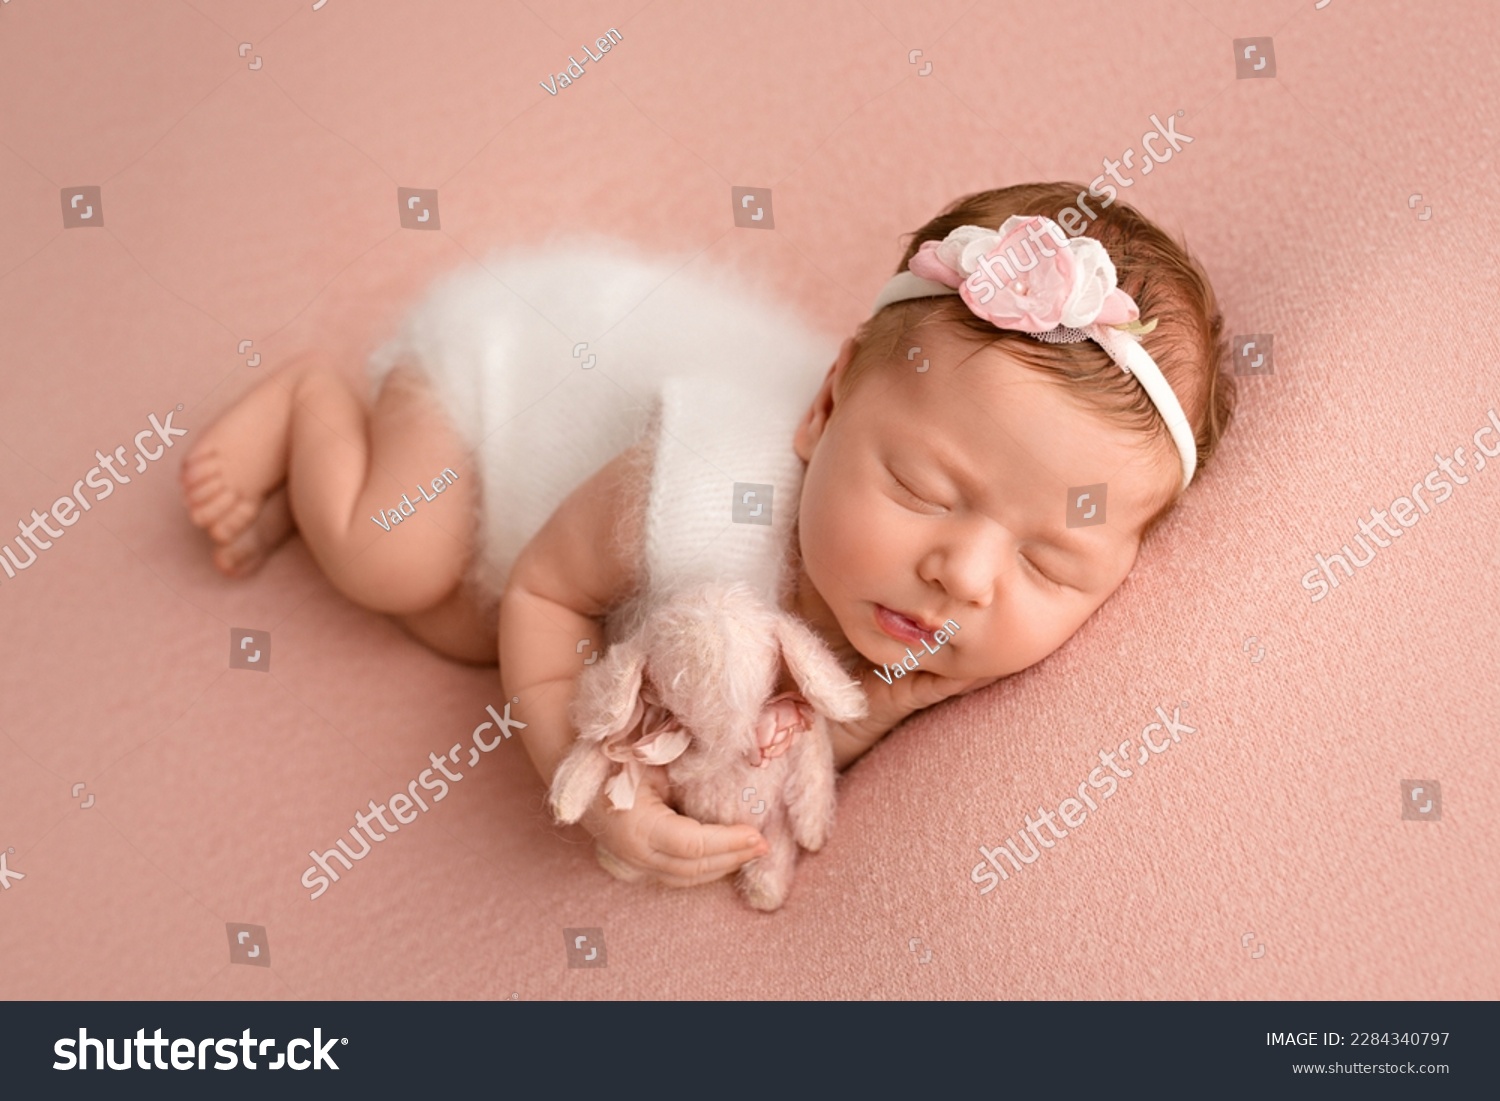 Top view of a newborn baby girl sleeping in a white jumpsuit with pink rabbit a white bandage and a pink flower on her head on a pink background. Beautiful portrait of a little girl 7 days, one week. #2284340797